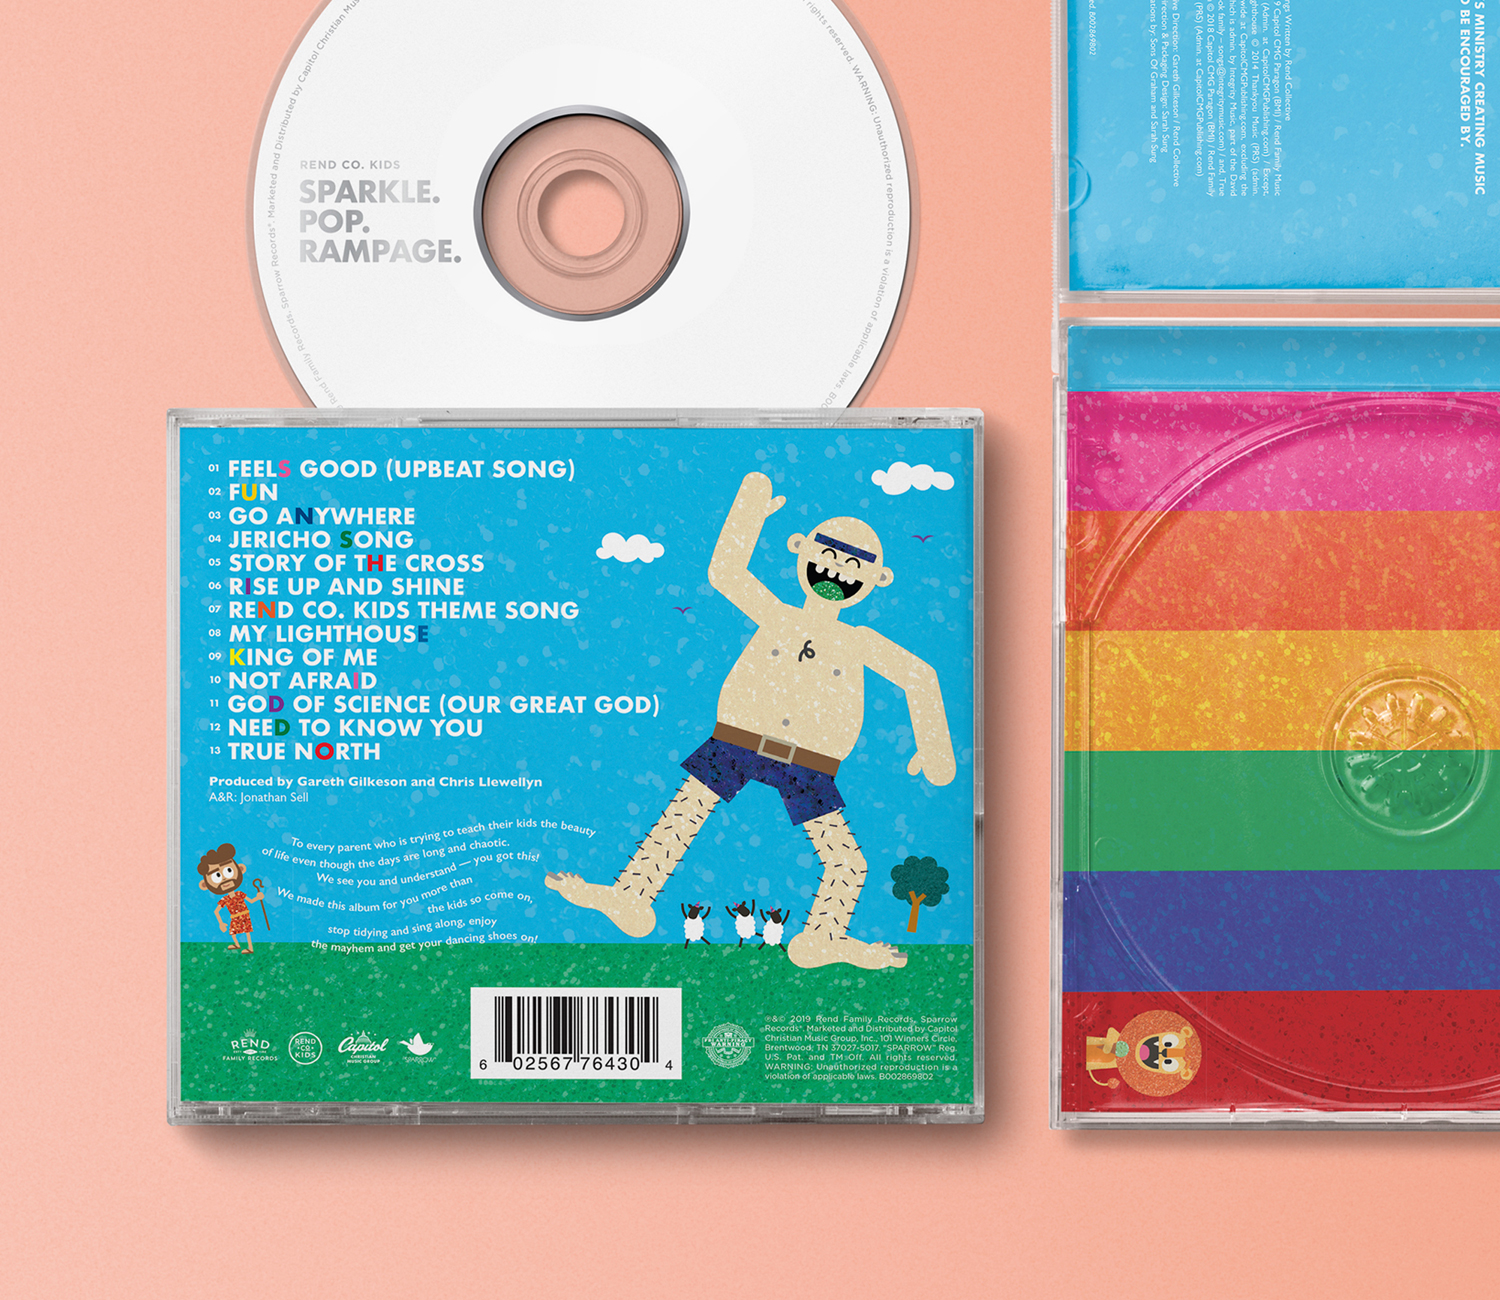 back of cd packaging with one letter highlighted from each song title